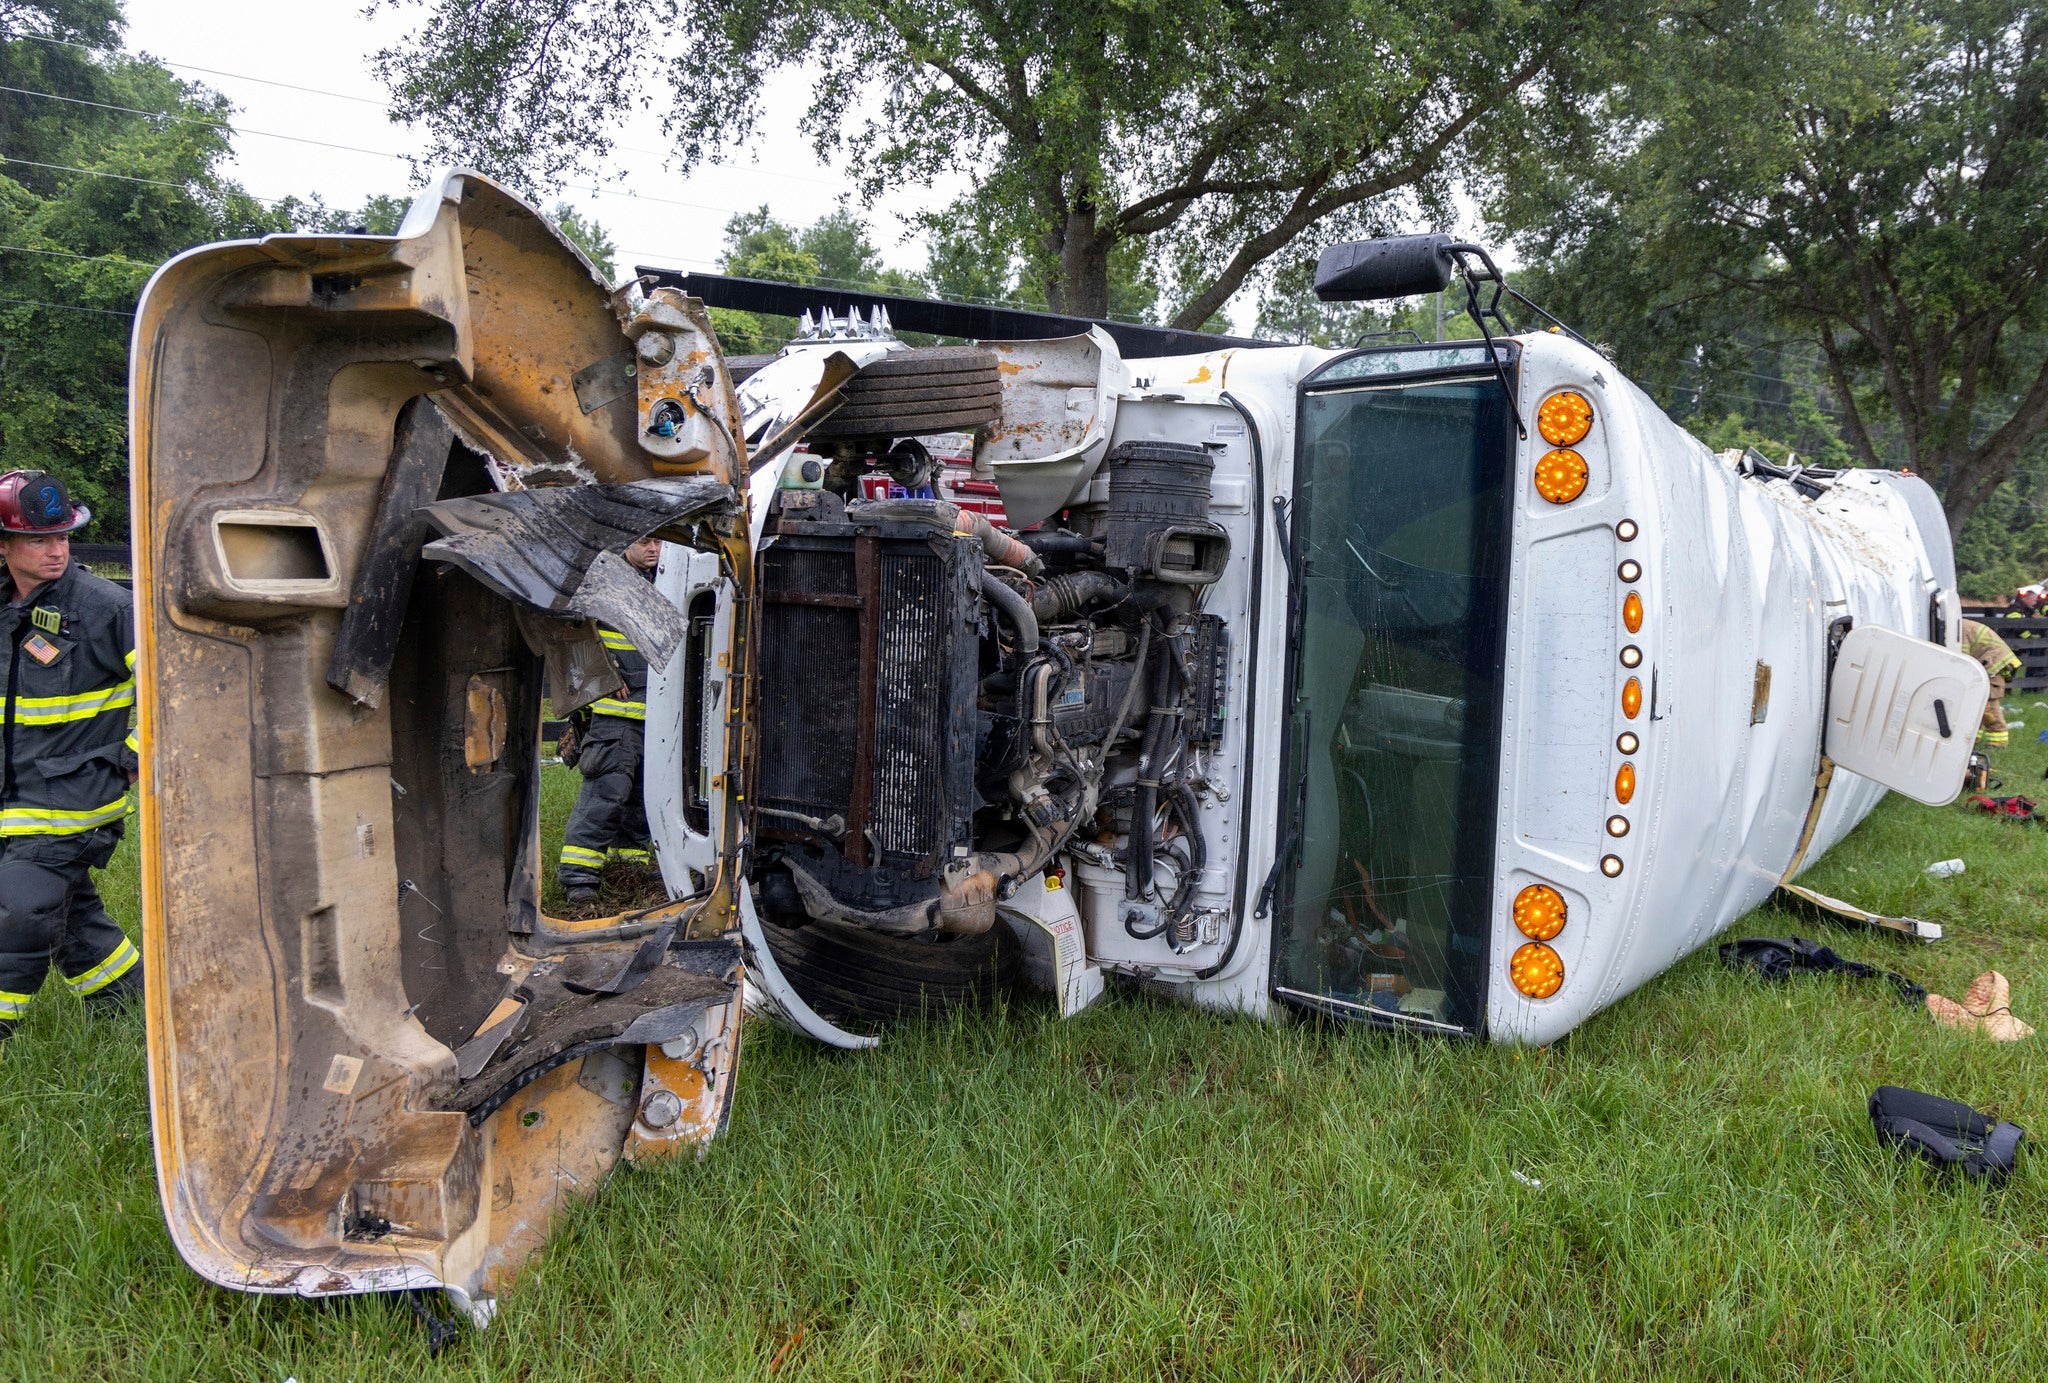 The bus carrying 53 farmworkers that crashed and overturned